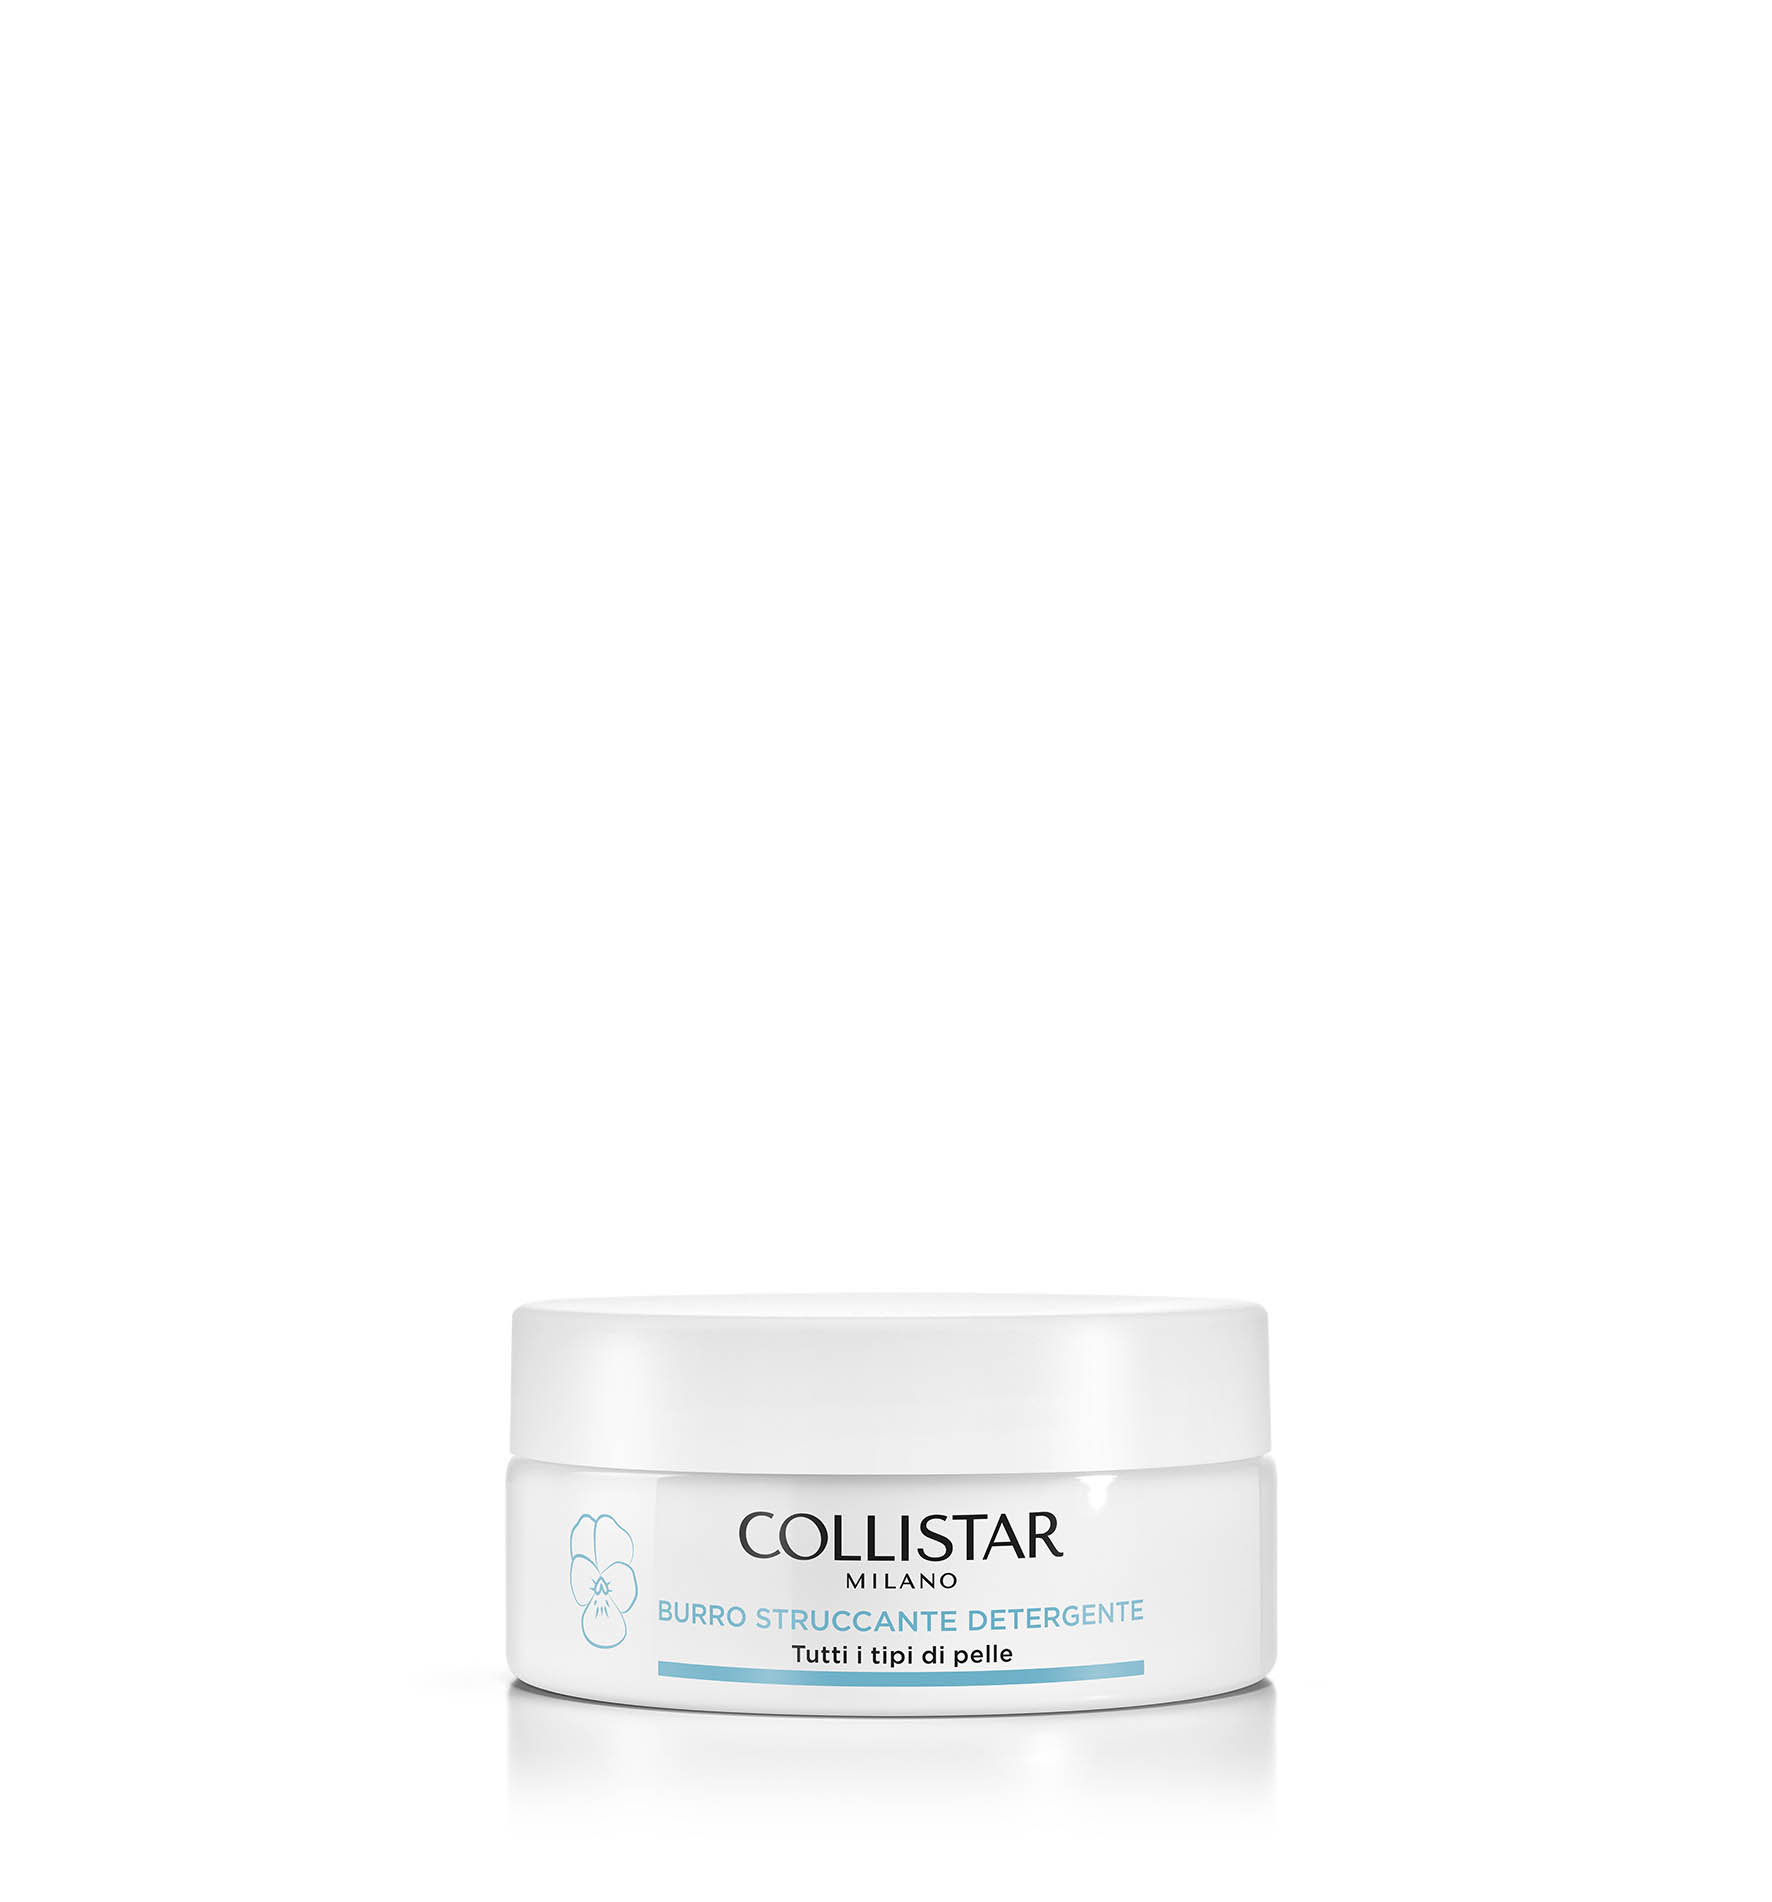 MAKE-UP REMOVING CLEANSING BALM - Combination and Oily Skin | Collistar - Shop Online Ufficiale